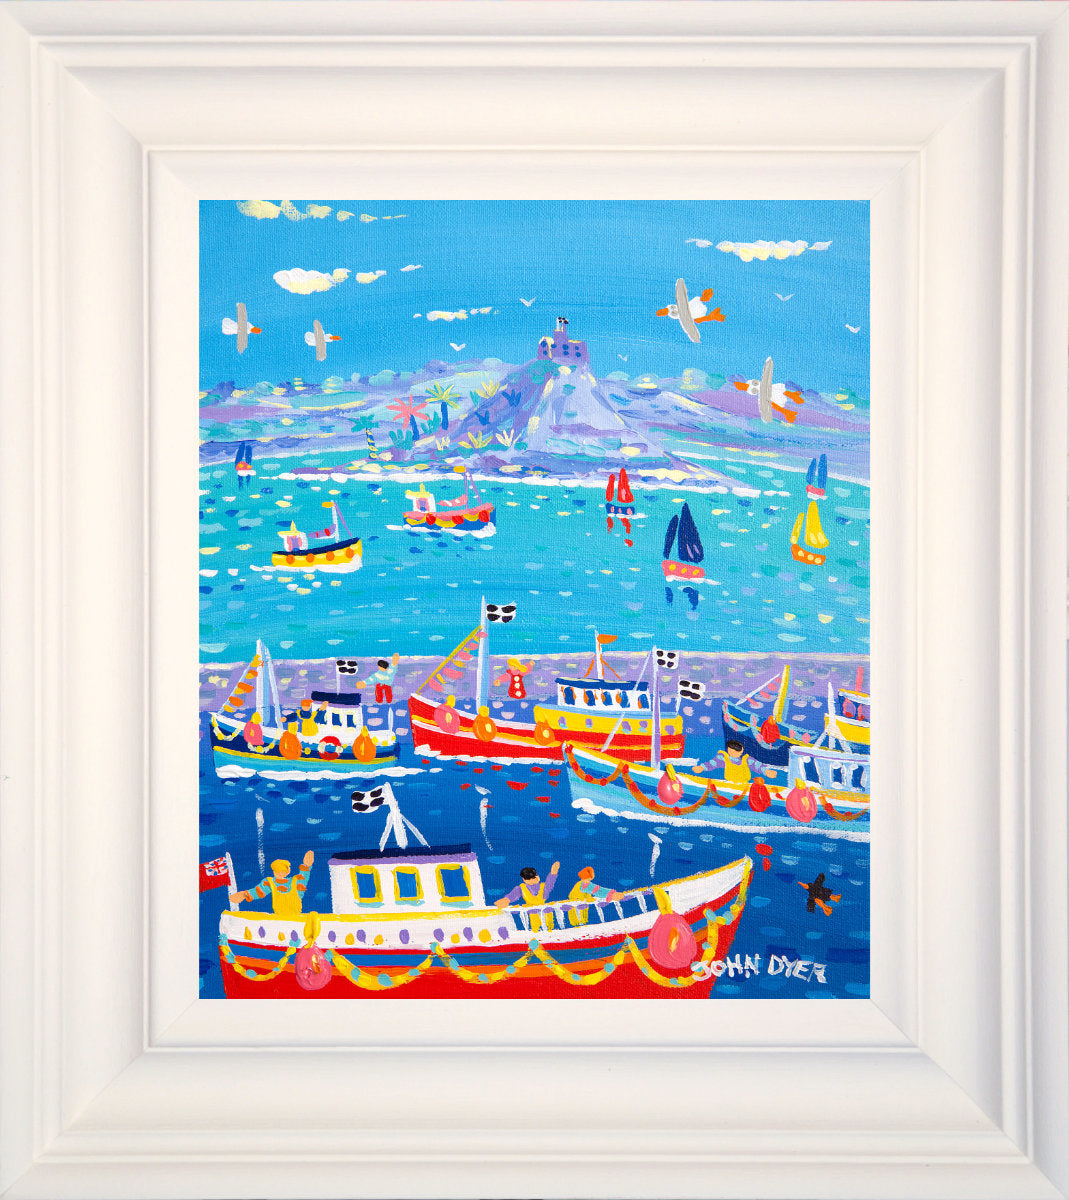 &#39;Looking across Newlyn&#39;, 12 x 10 inches acrylic on canvas. Cornwall Art Gallery Original Art Painting by Cornish Artist John Dyer